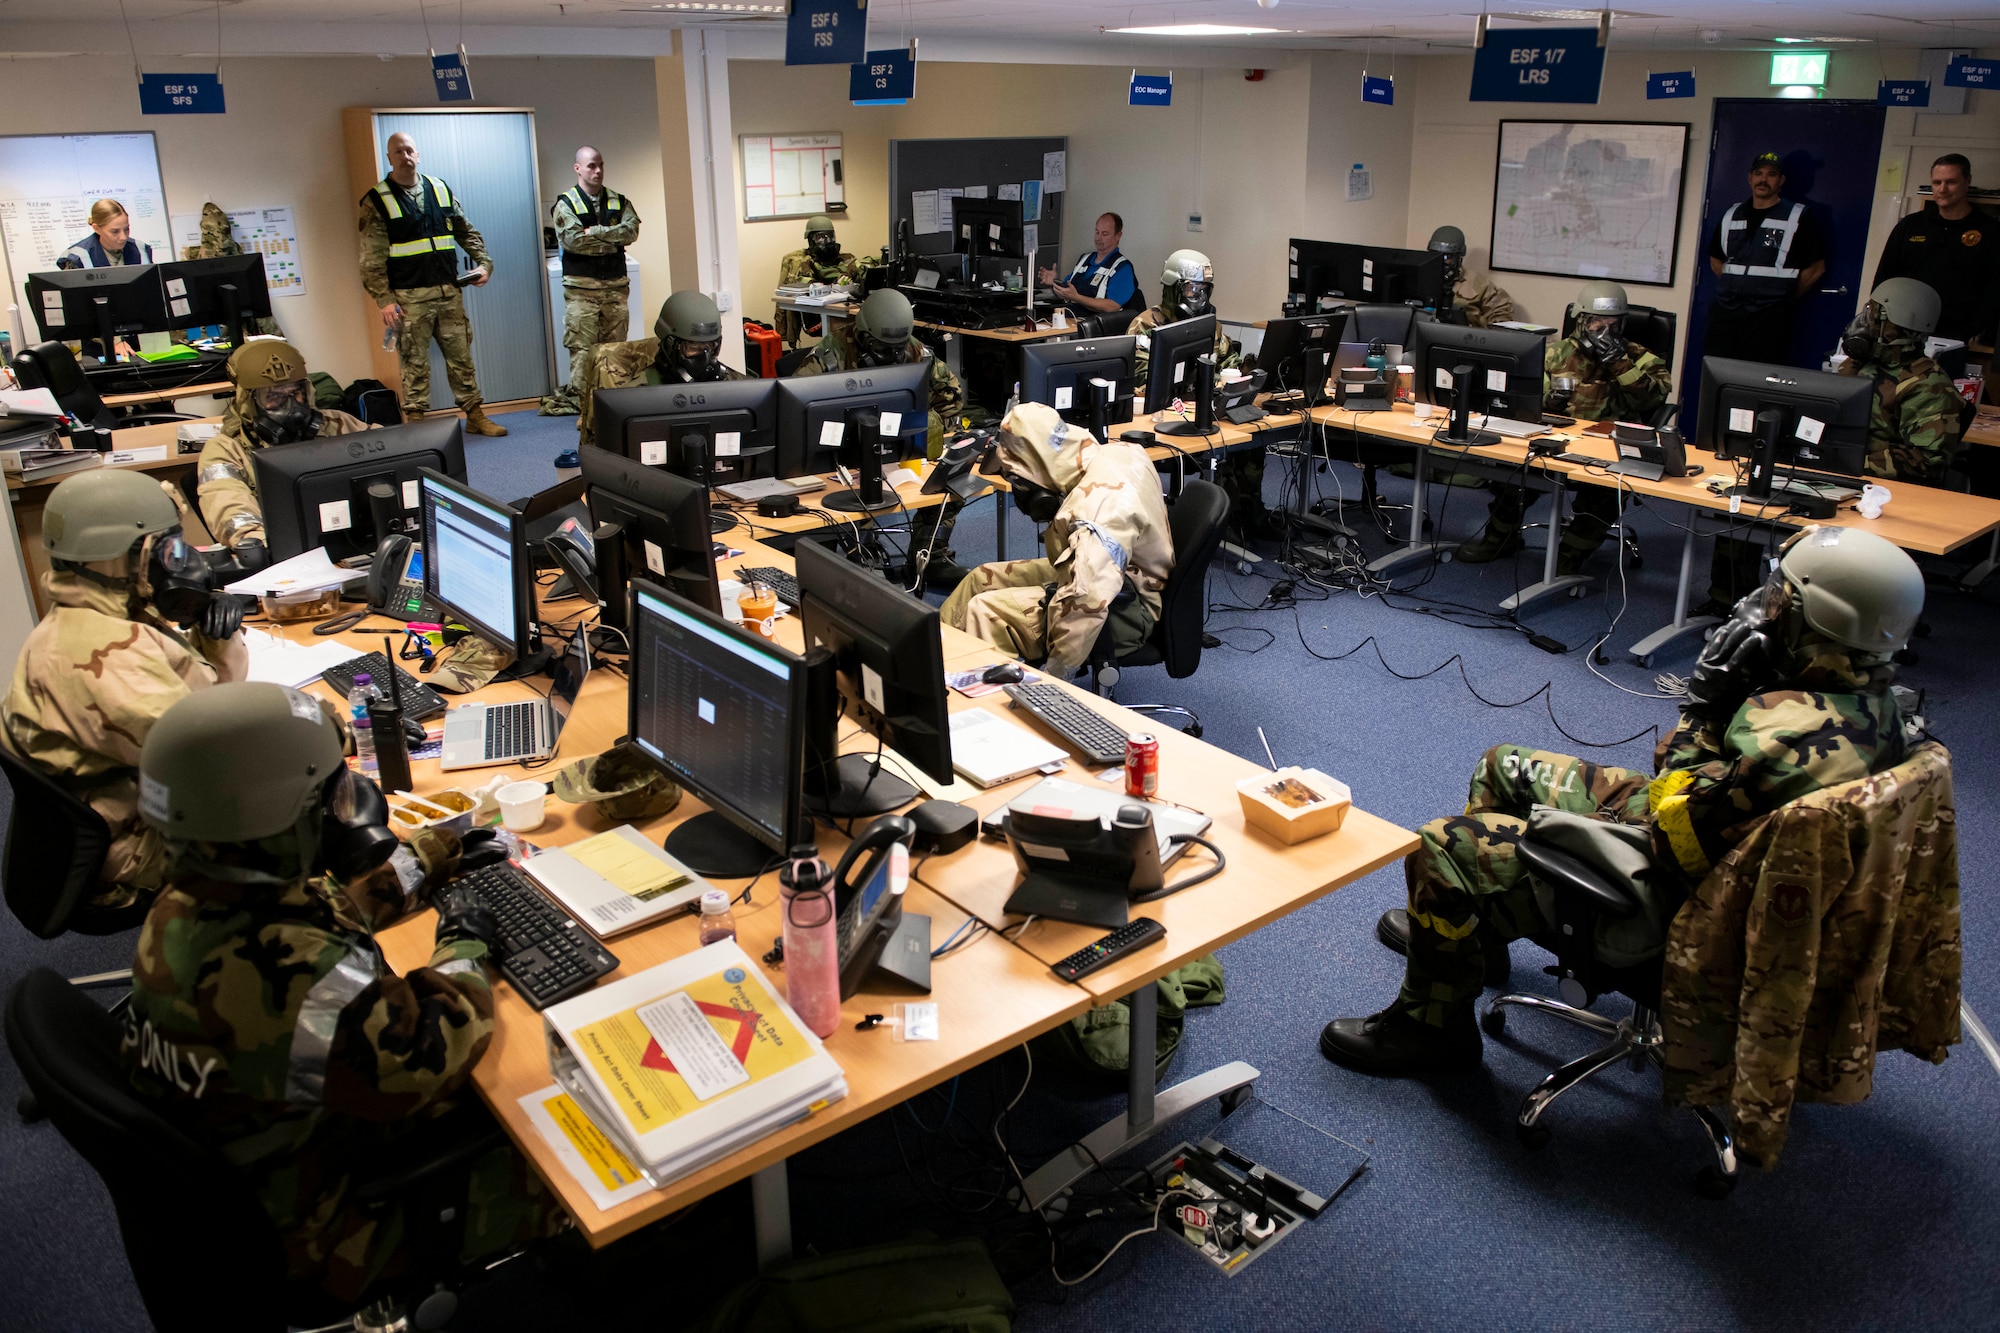 Members of the Emergency Operations Center work together during an exercise at RAF Alconbury, England, Nov. 17, 2022. The EOC is the command and control hub for emergency operations on base. Airmen across the 501st Combat Support Wing took part in a readiness exercise to test various capabilities, identify areas for improvement and strengthen operations. (U.S. Air Force photo by Senior Airman Jennifer Zima)